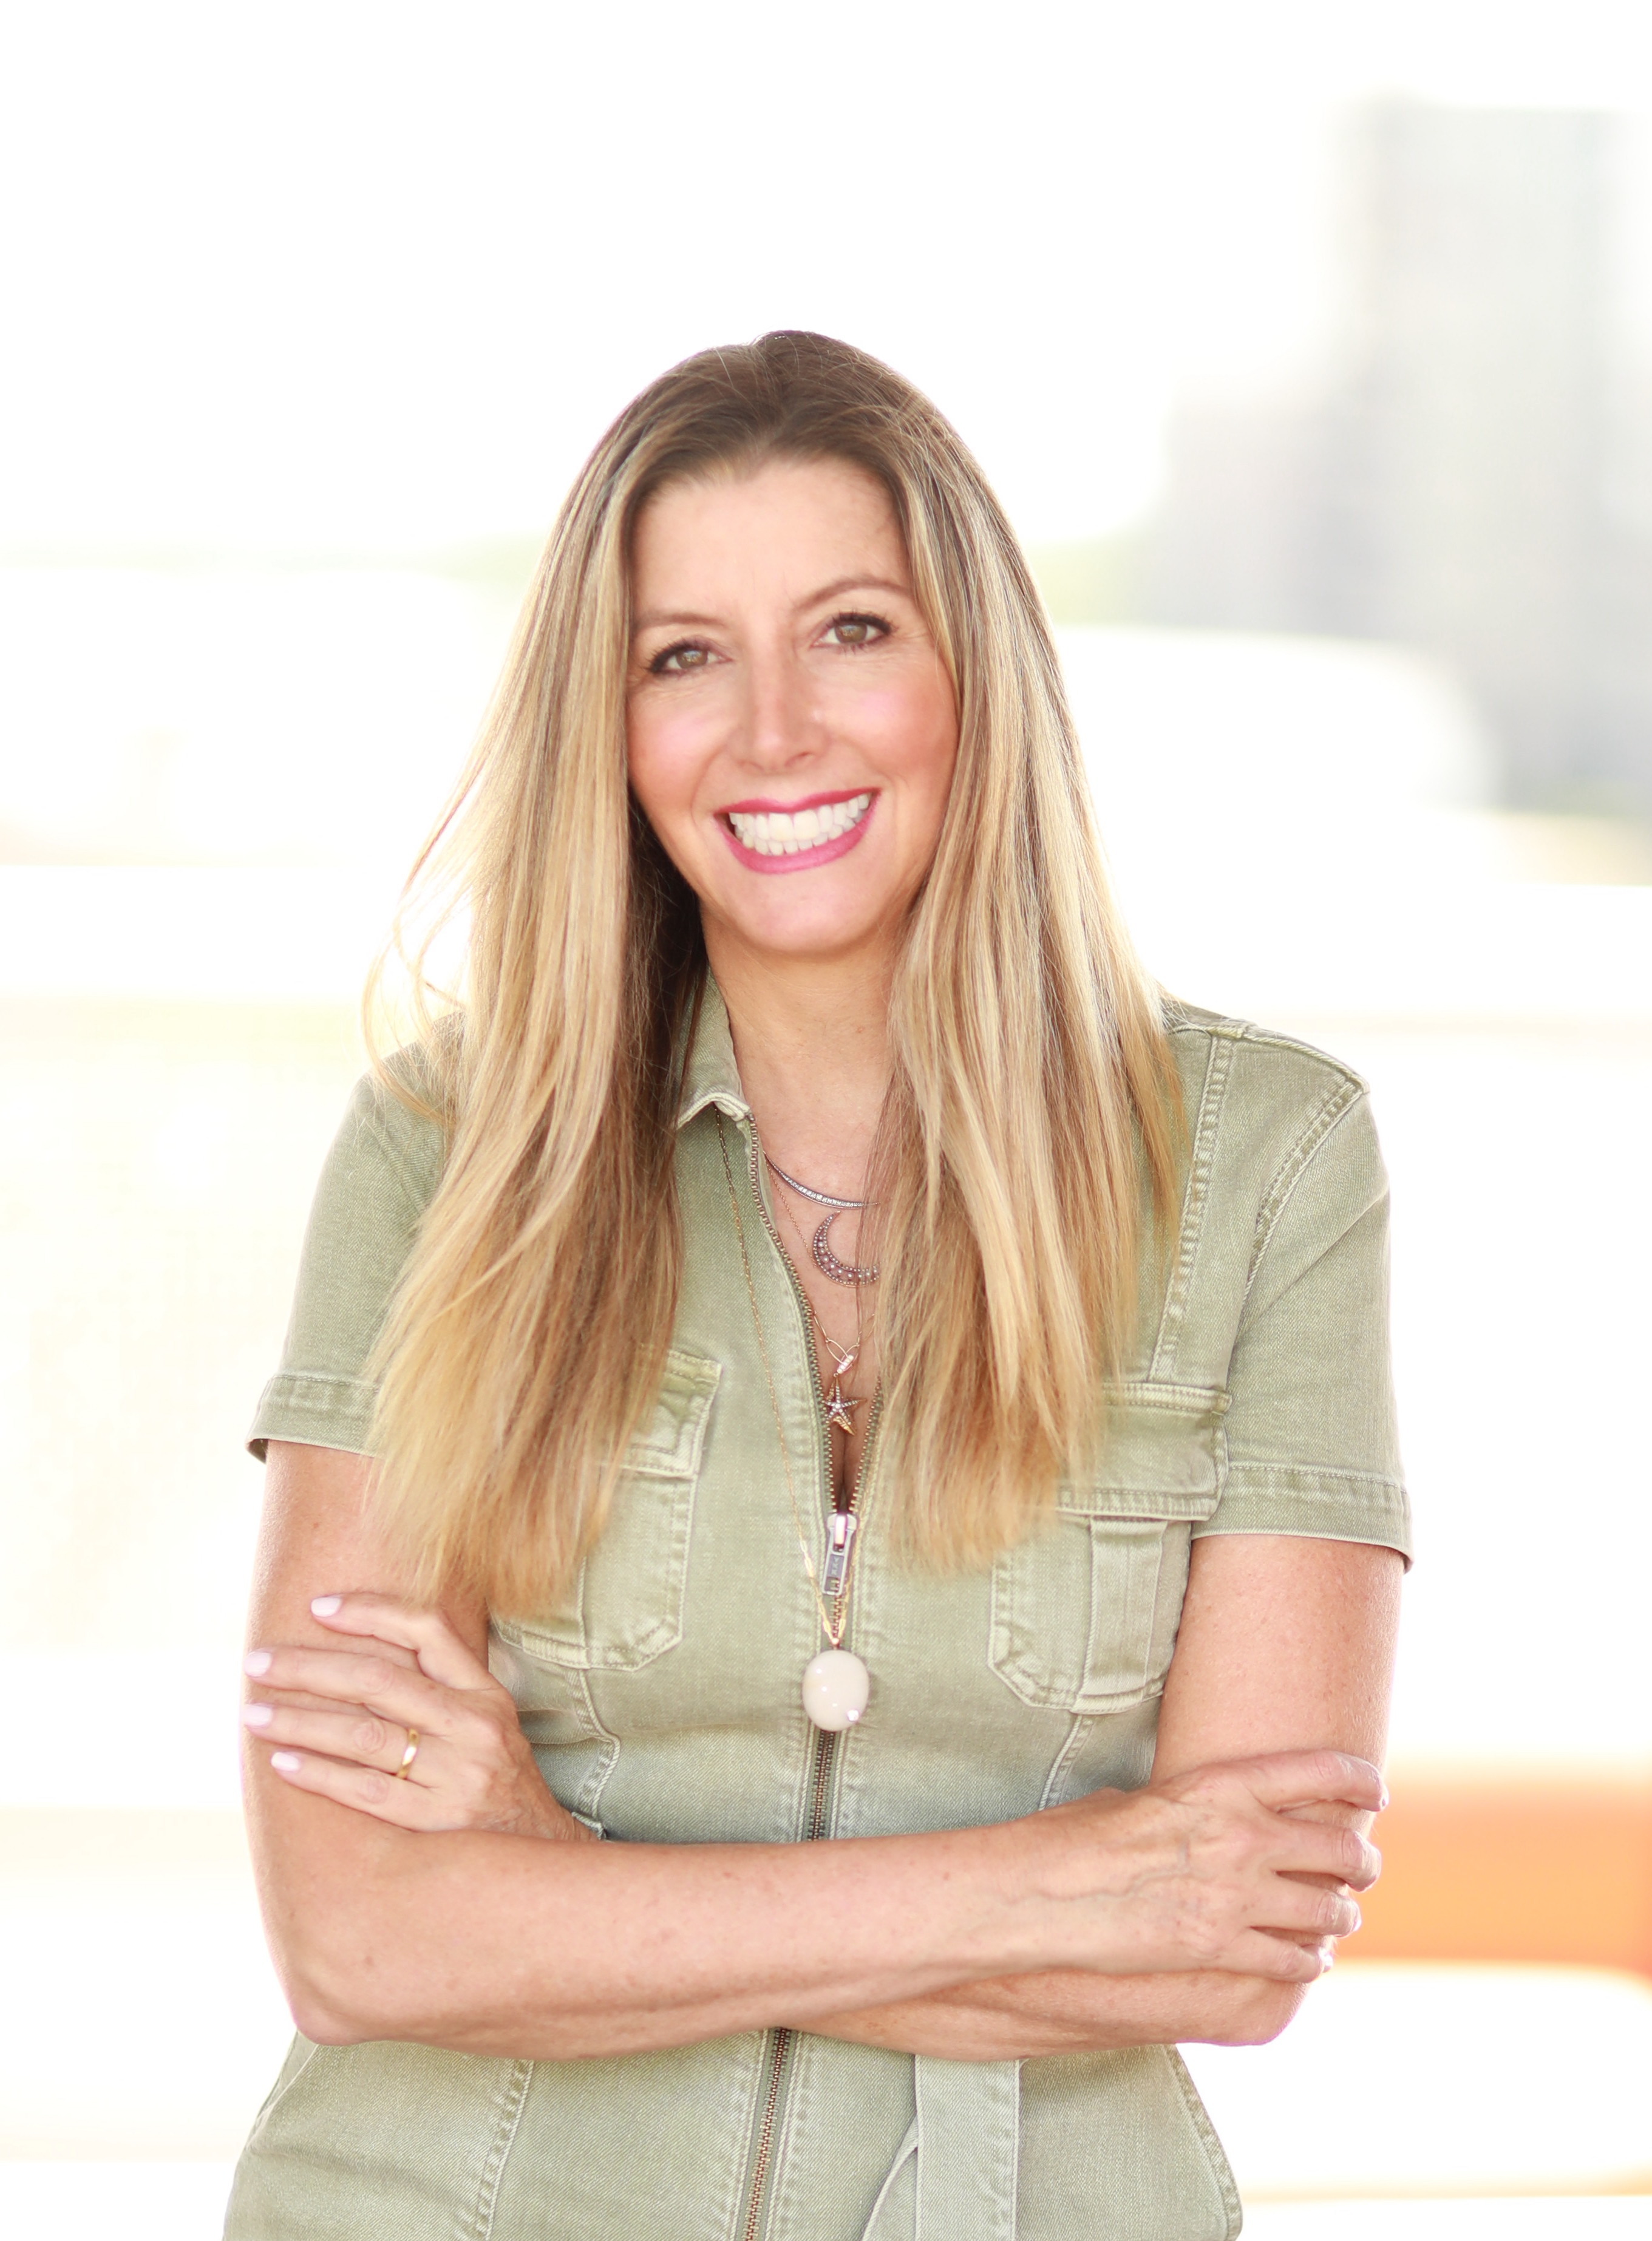 Spanx founder and Clearwater native Sara Blakely poised to join an